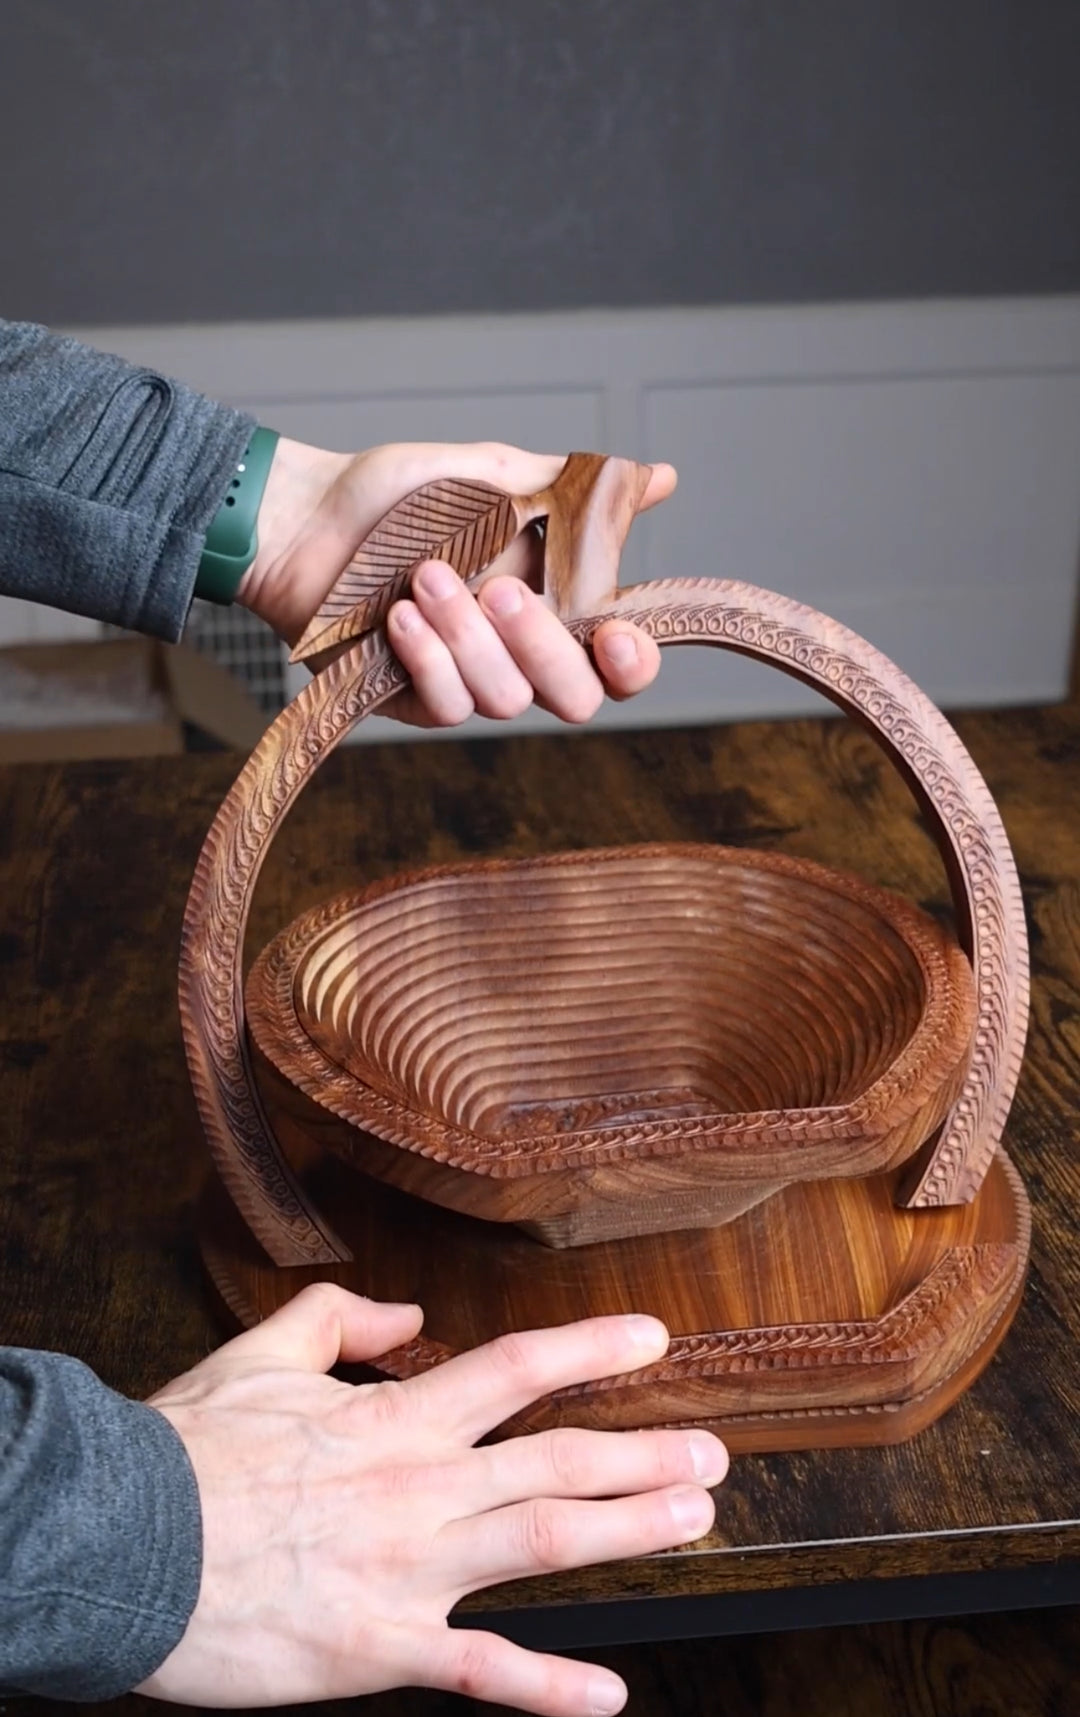 Apple Collapsible Basket